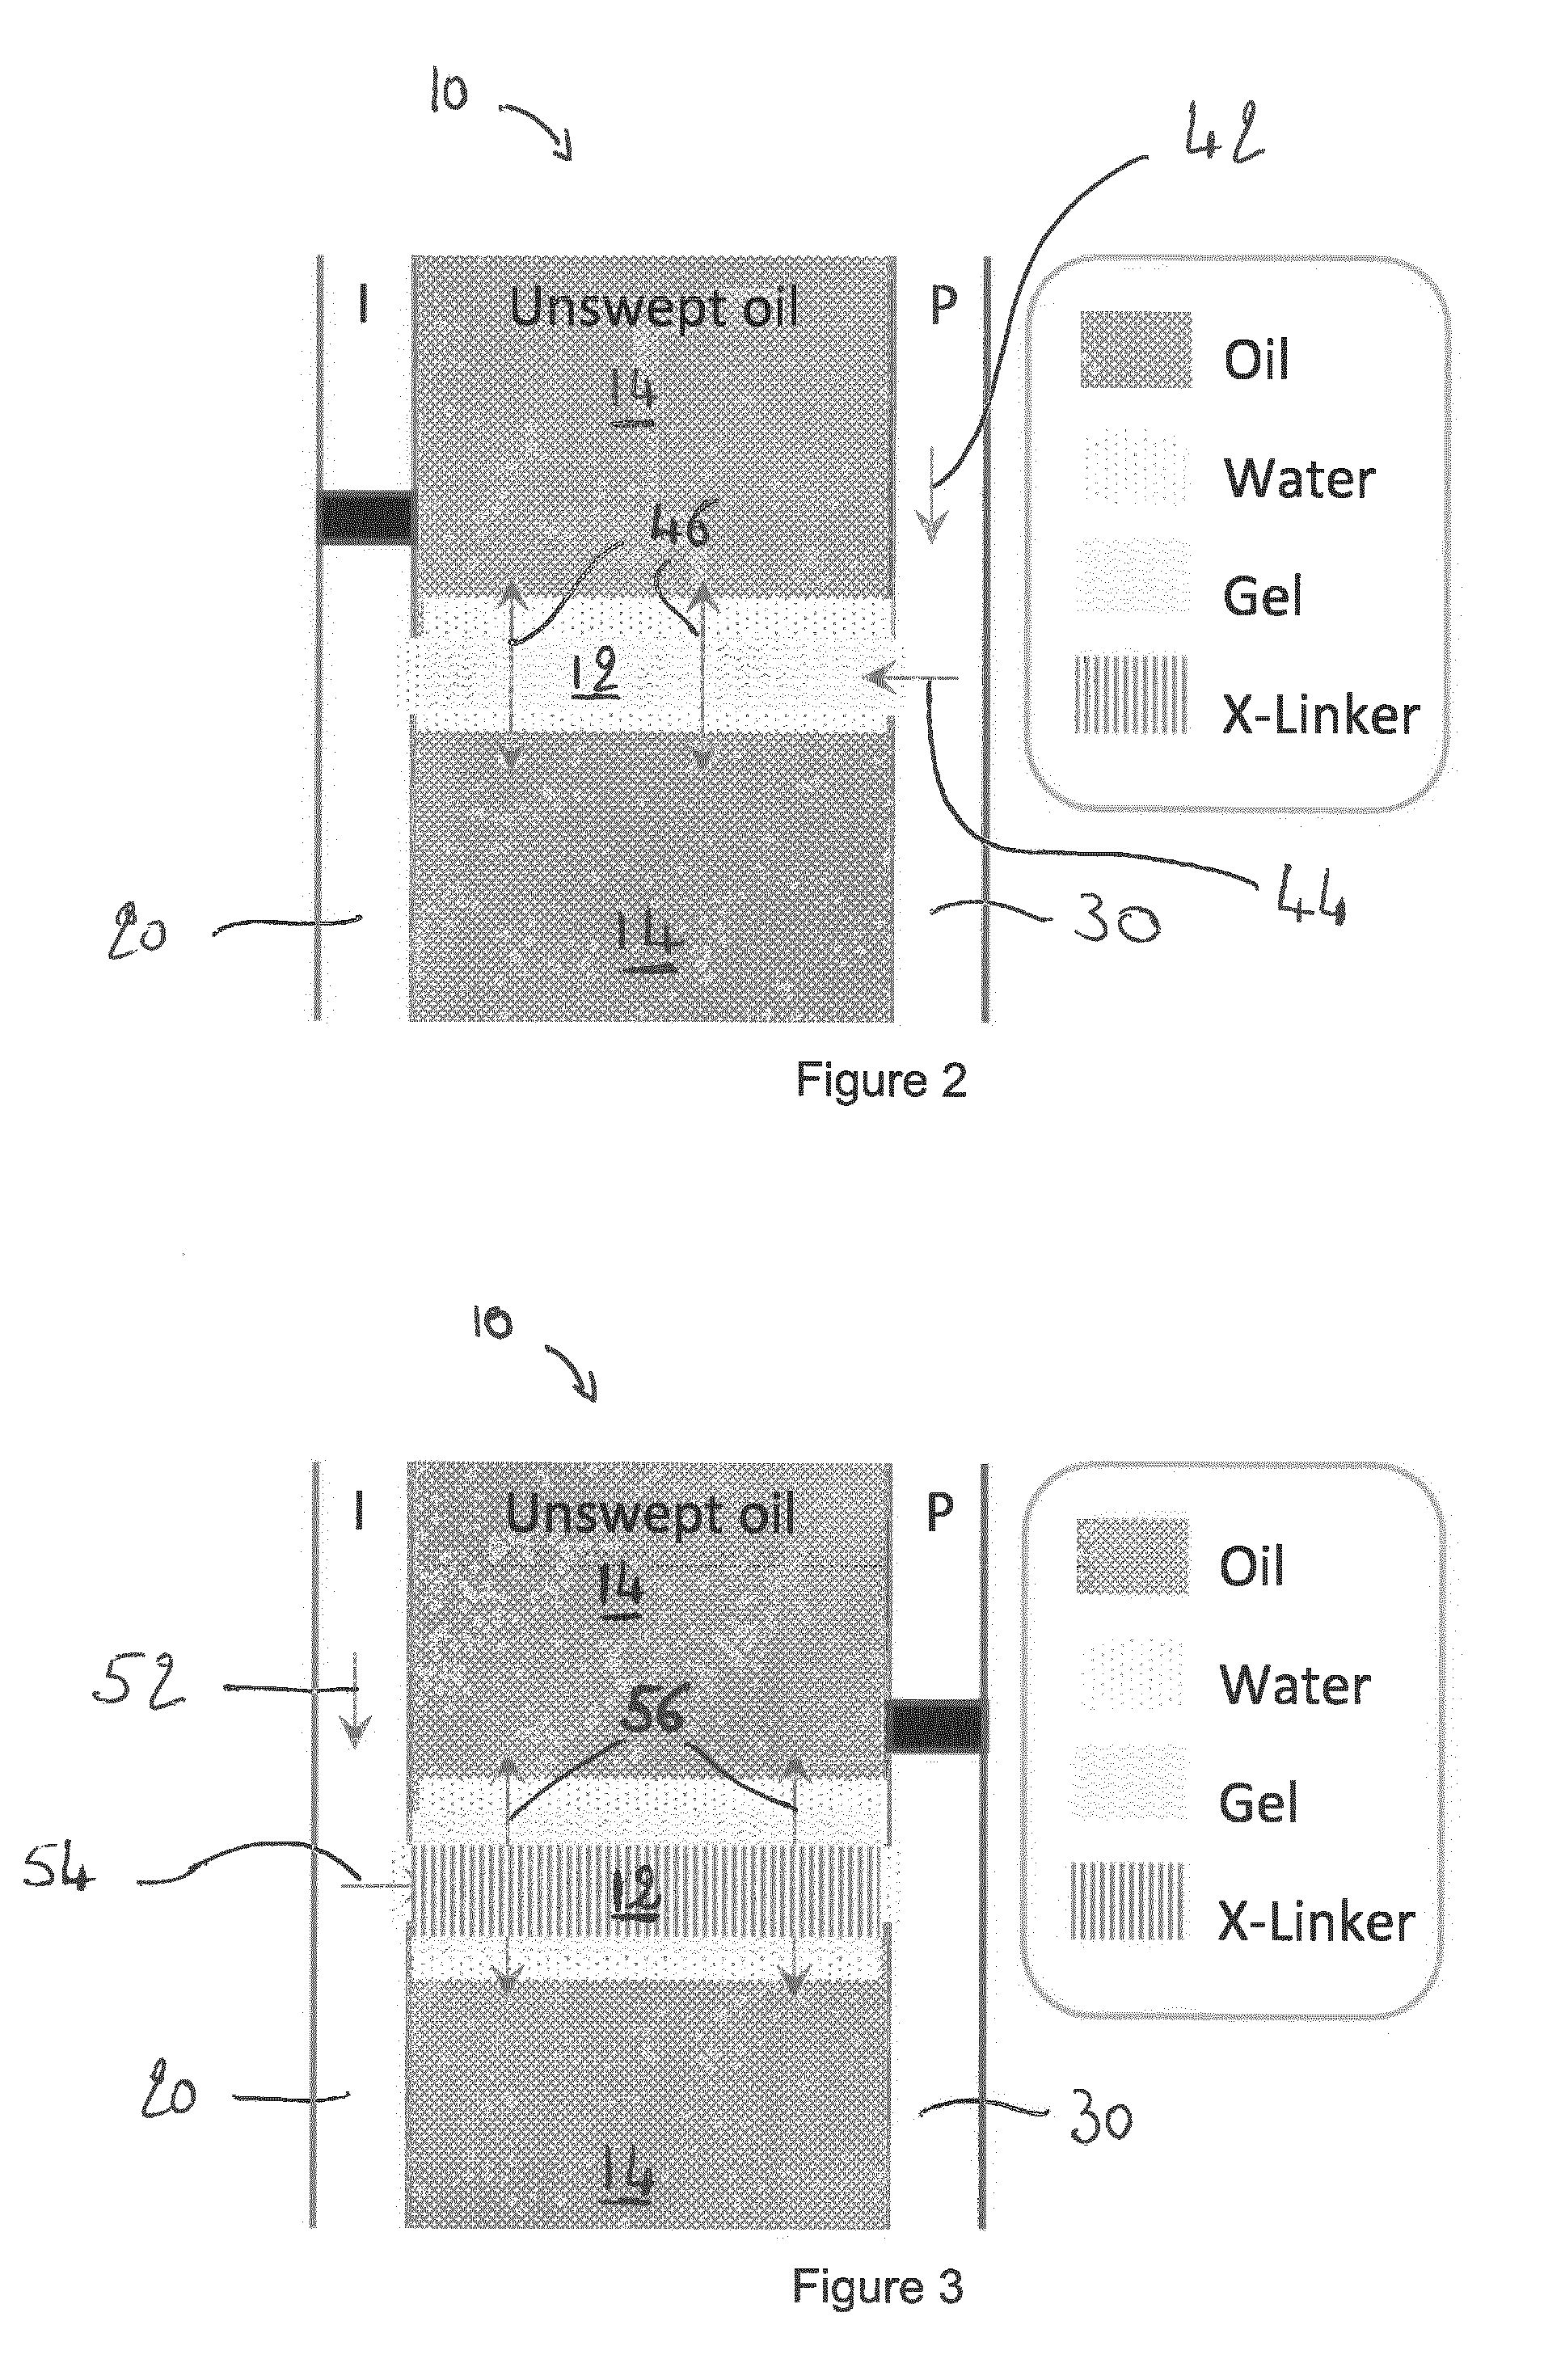 Controlled alternating flow direction for enhanced conformance